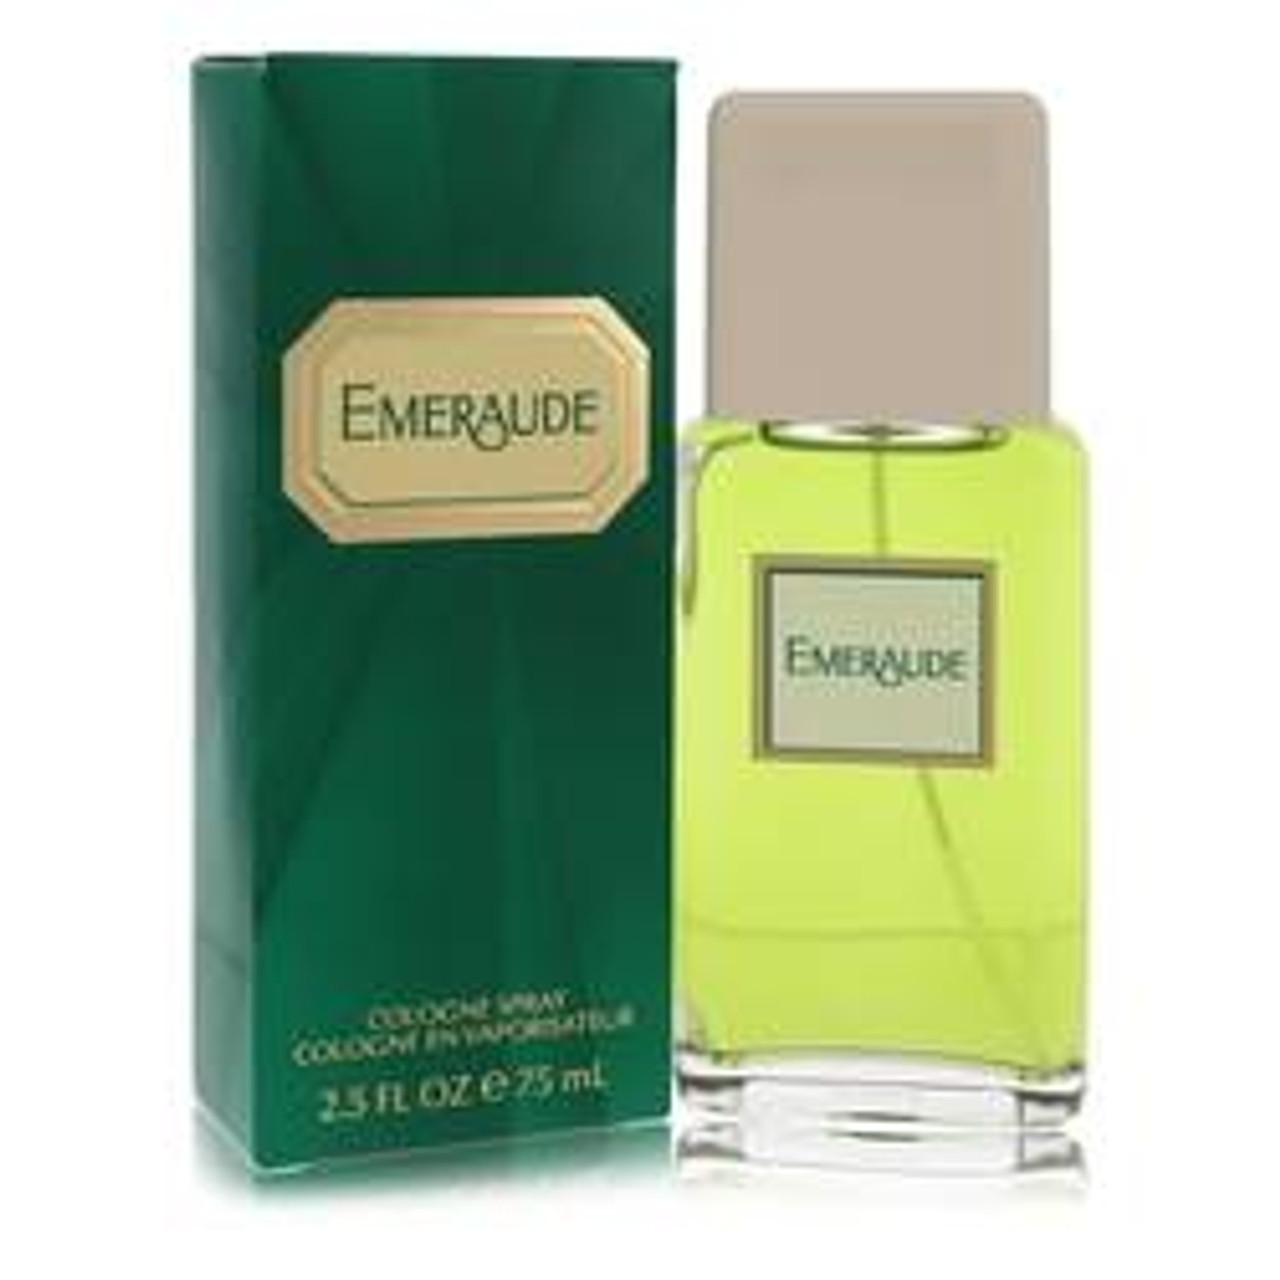 Emeraude Perfume By Coty Cologne Spray 2.5 oz for Women - [From 59.00 - Choose pk Qty ] - *Ships from Miami